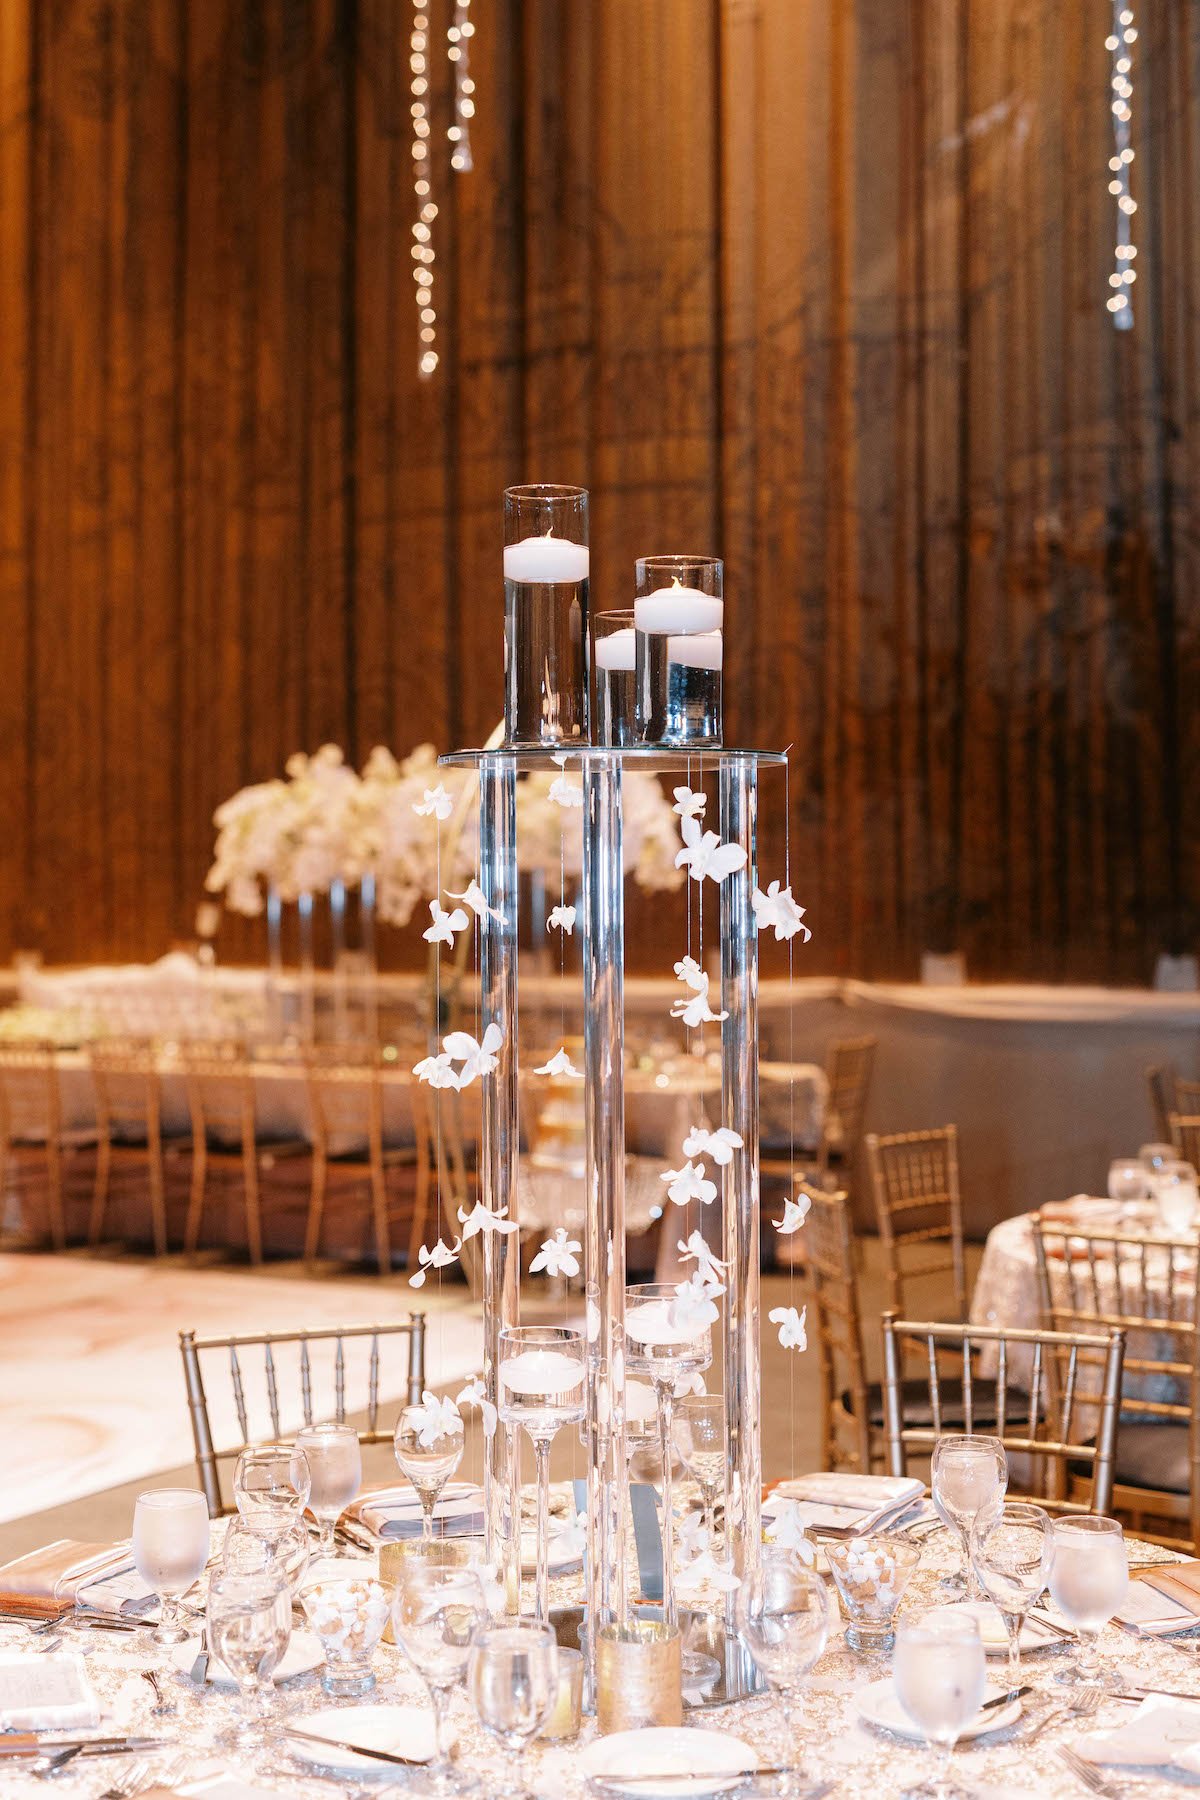 St. Louis Wedding Flowers - Cylinder Vase with Floating Candle in St Louis,  MO